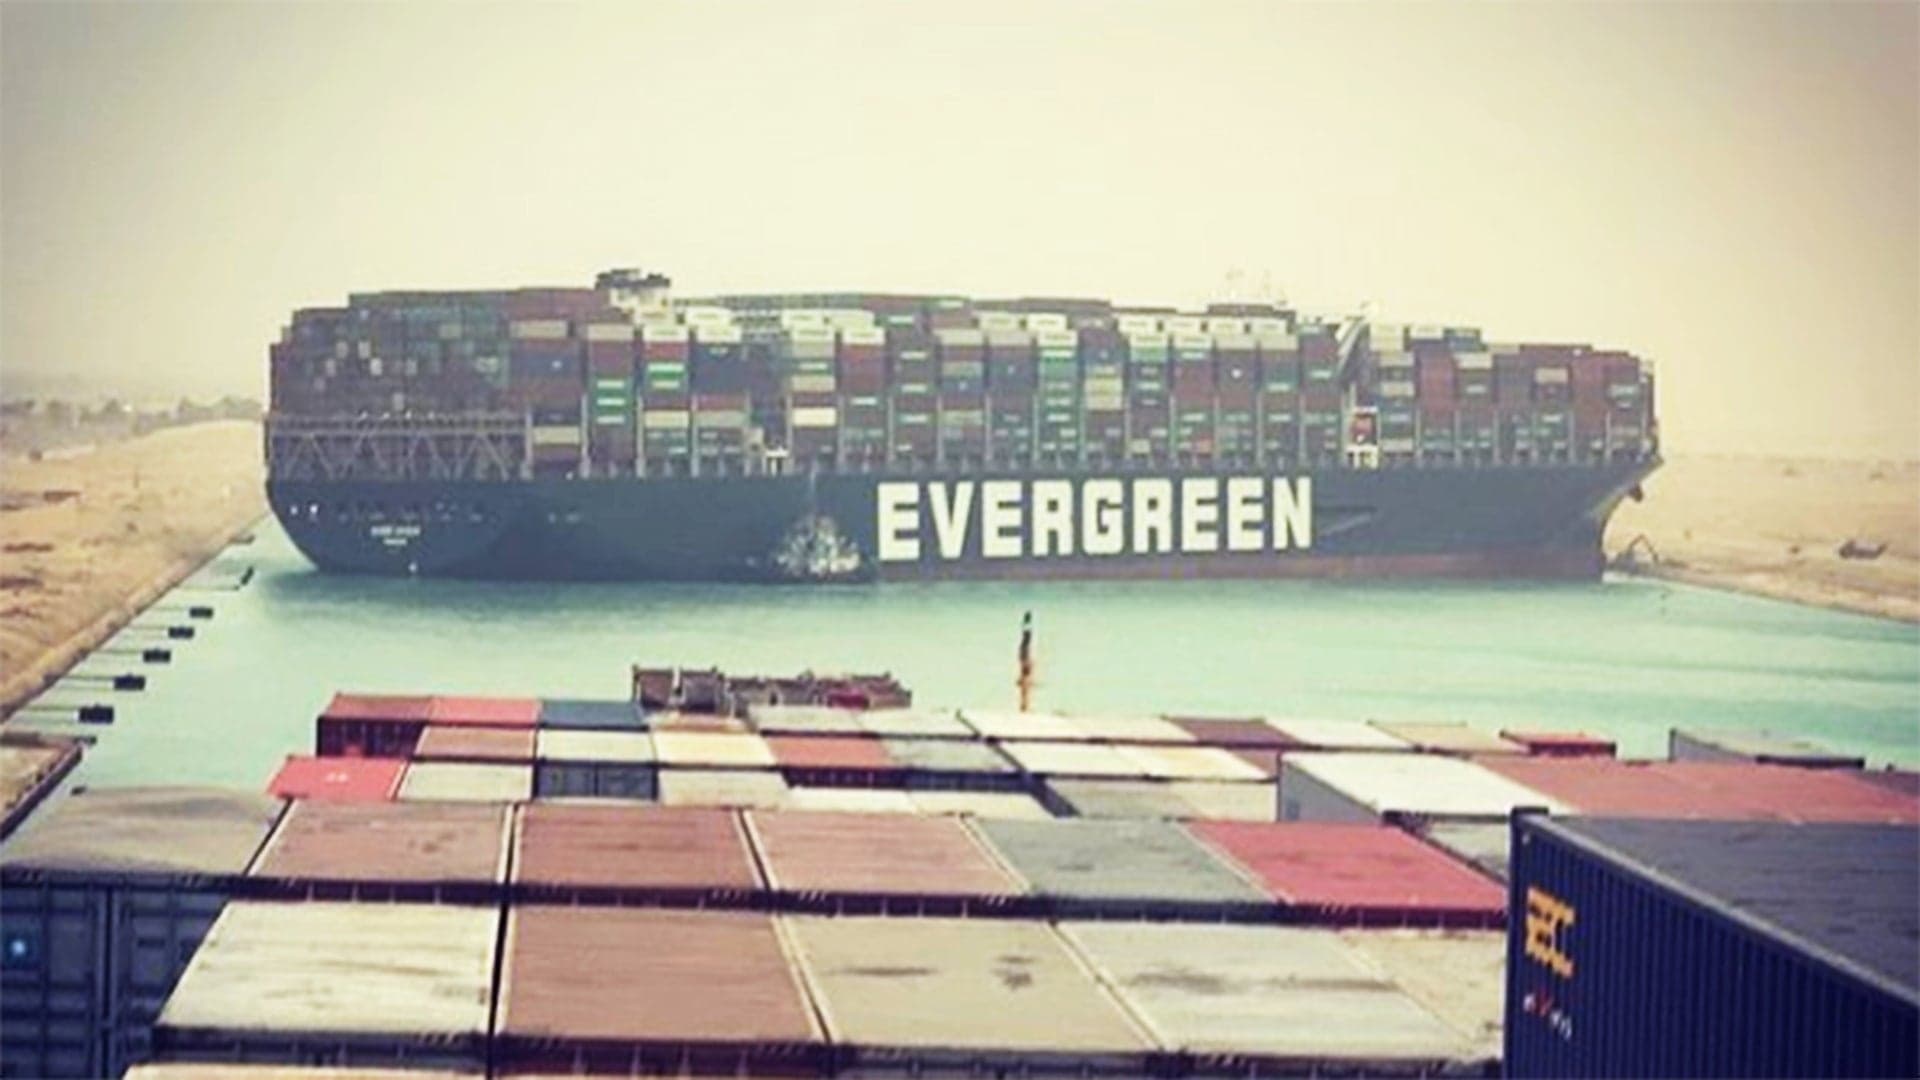 Suez Canal Totally Blocked After One Of the World’s Largest Container Ships Runs Aground